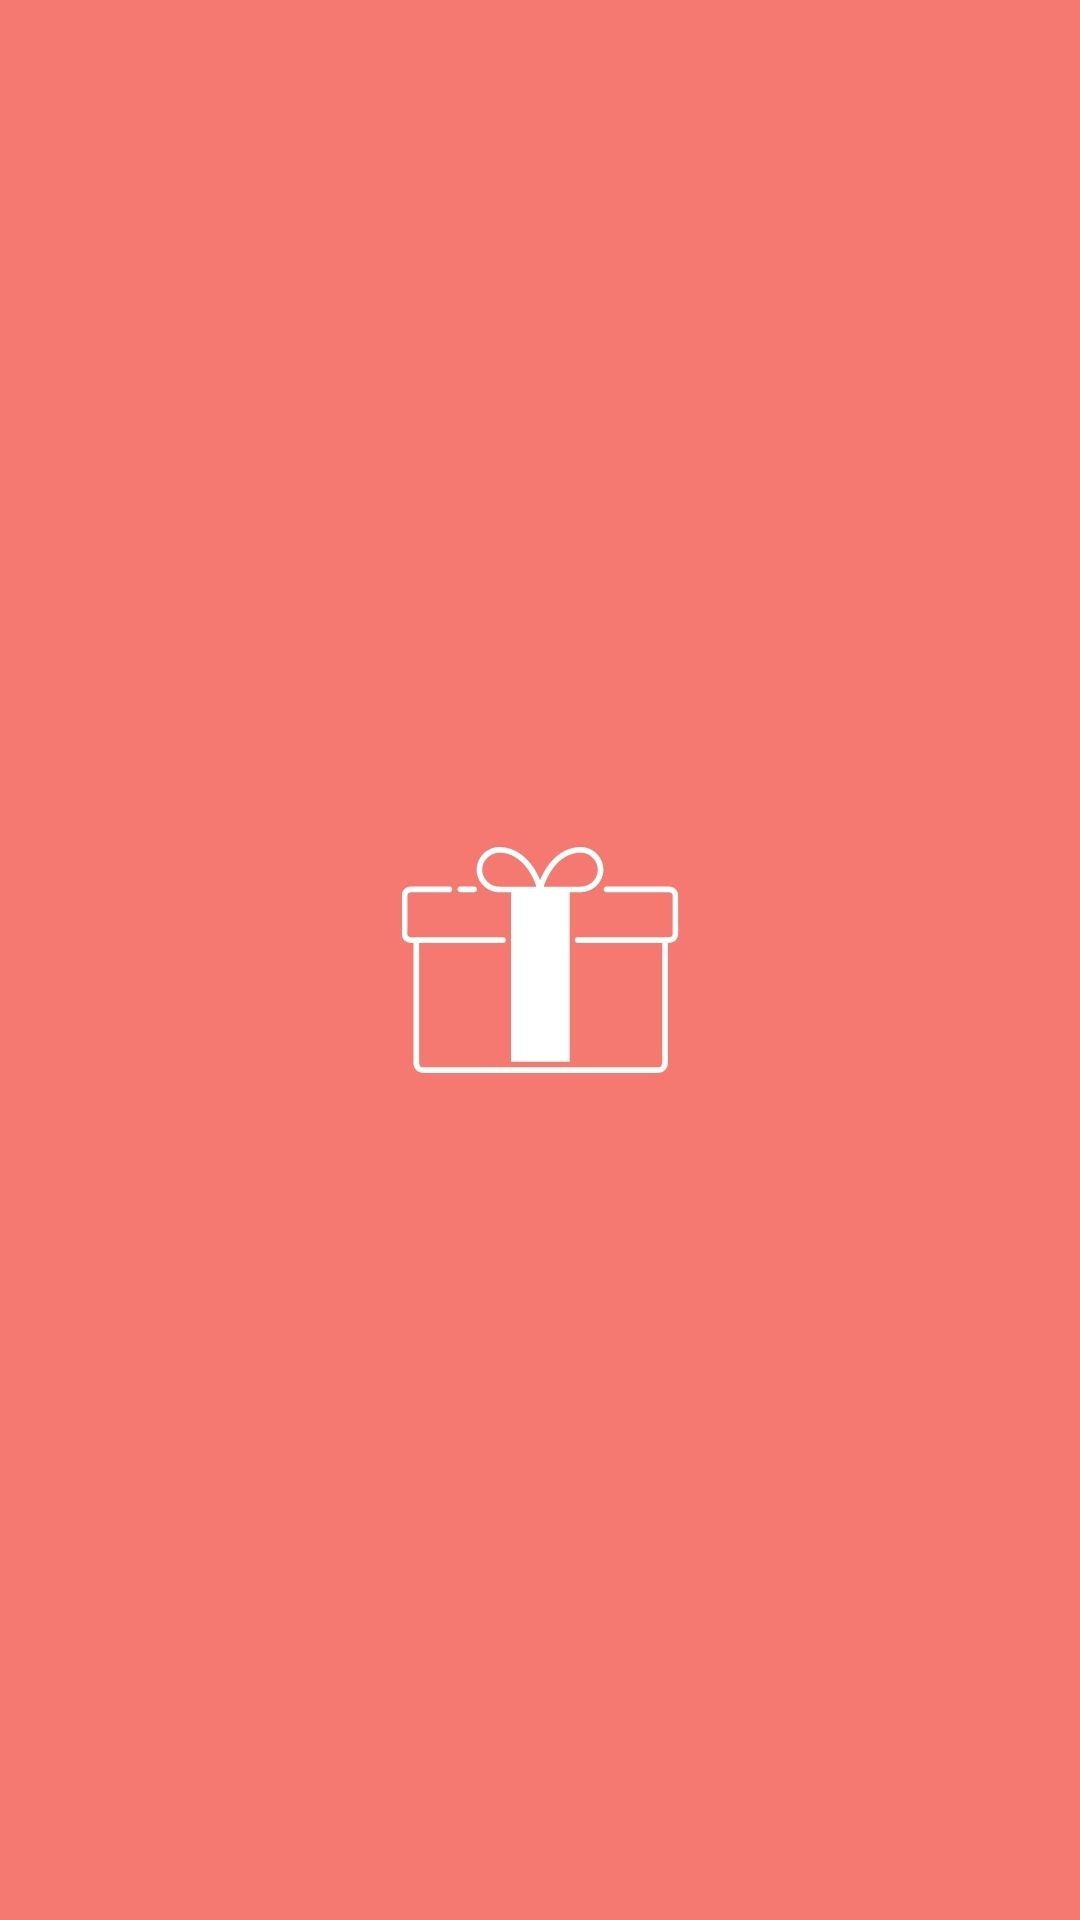 Happy birthday instagram story highlight cover salmon color with gift icon